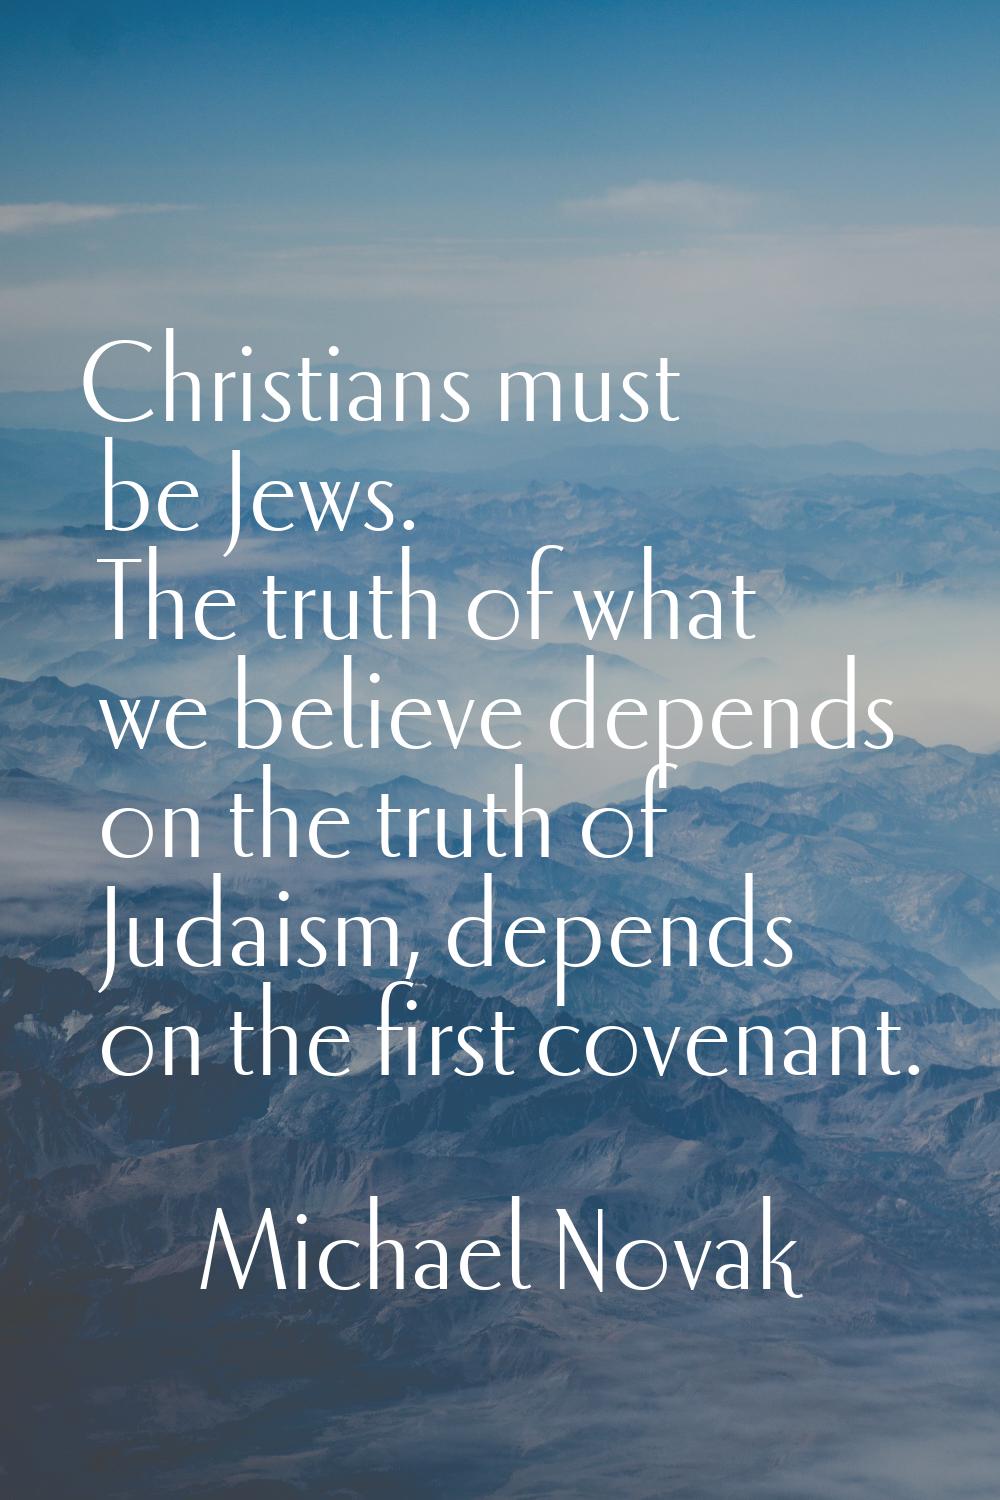 Christians must be Jews. The truth of what we believe depends on the truth of Judaism, depends on t